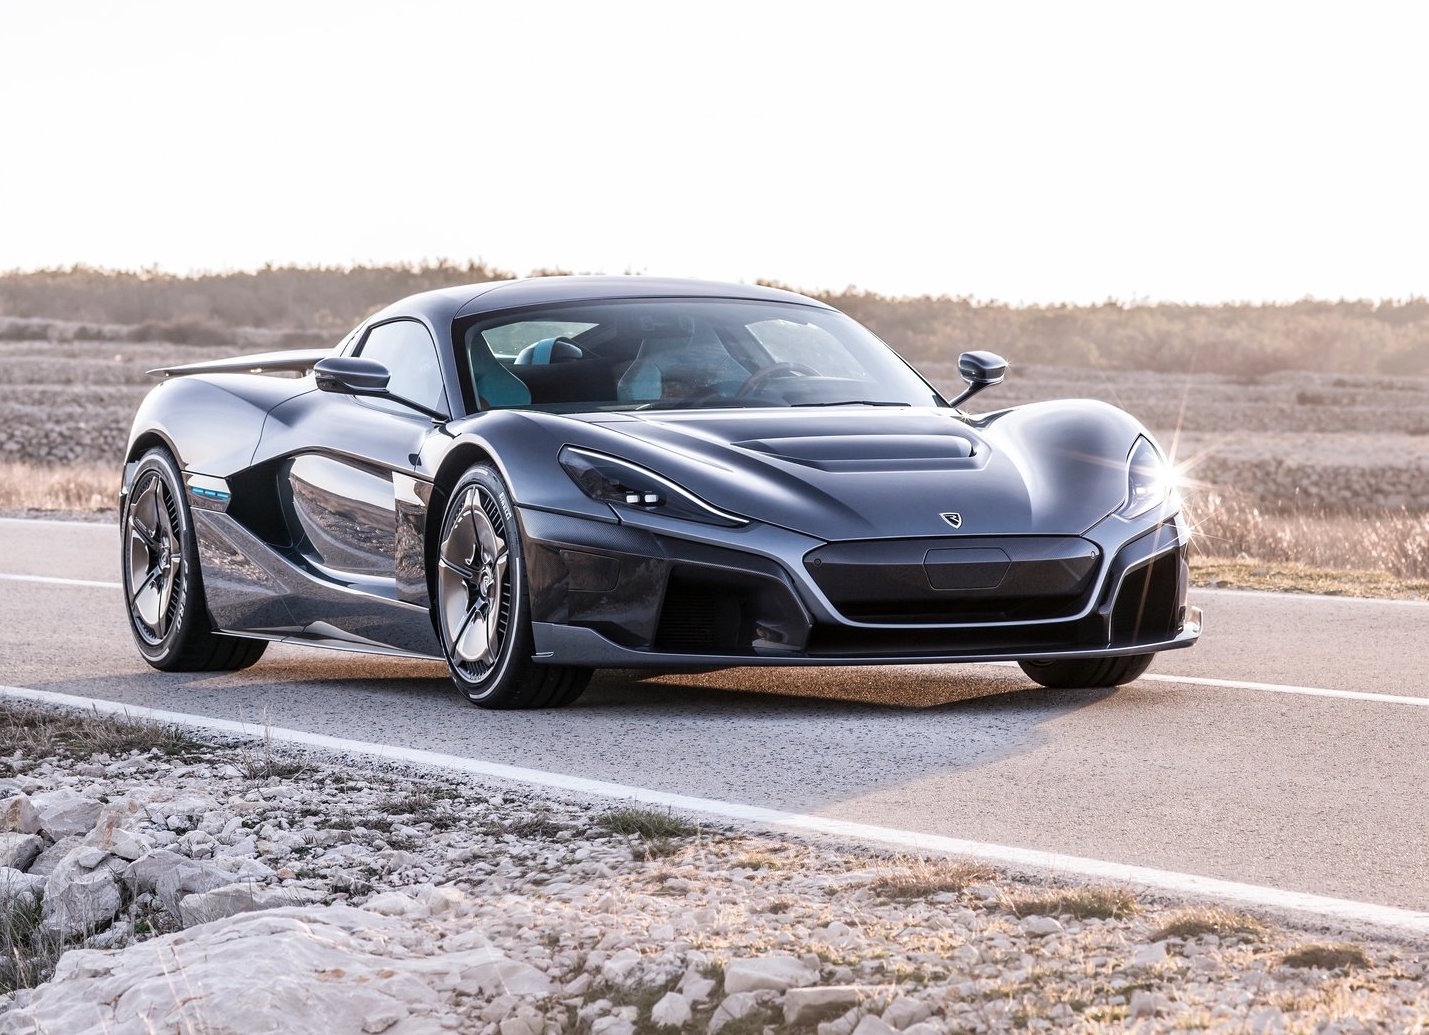 Porsche buys 10% stake in Rimac, forges “development partnership”